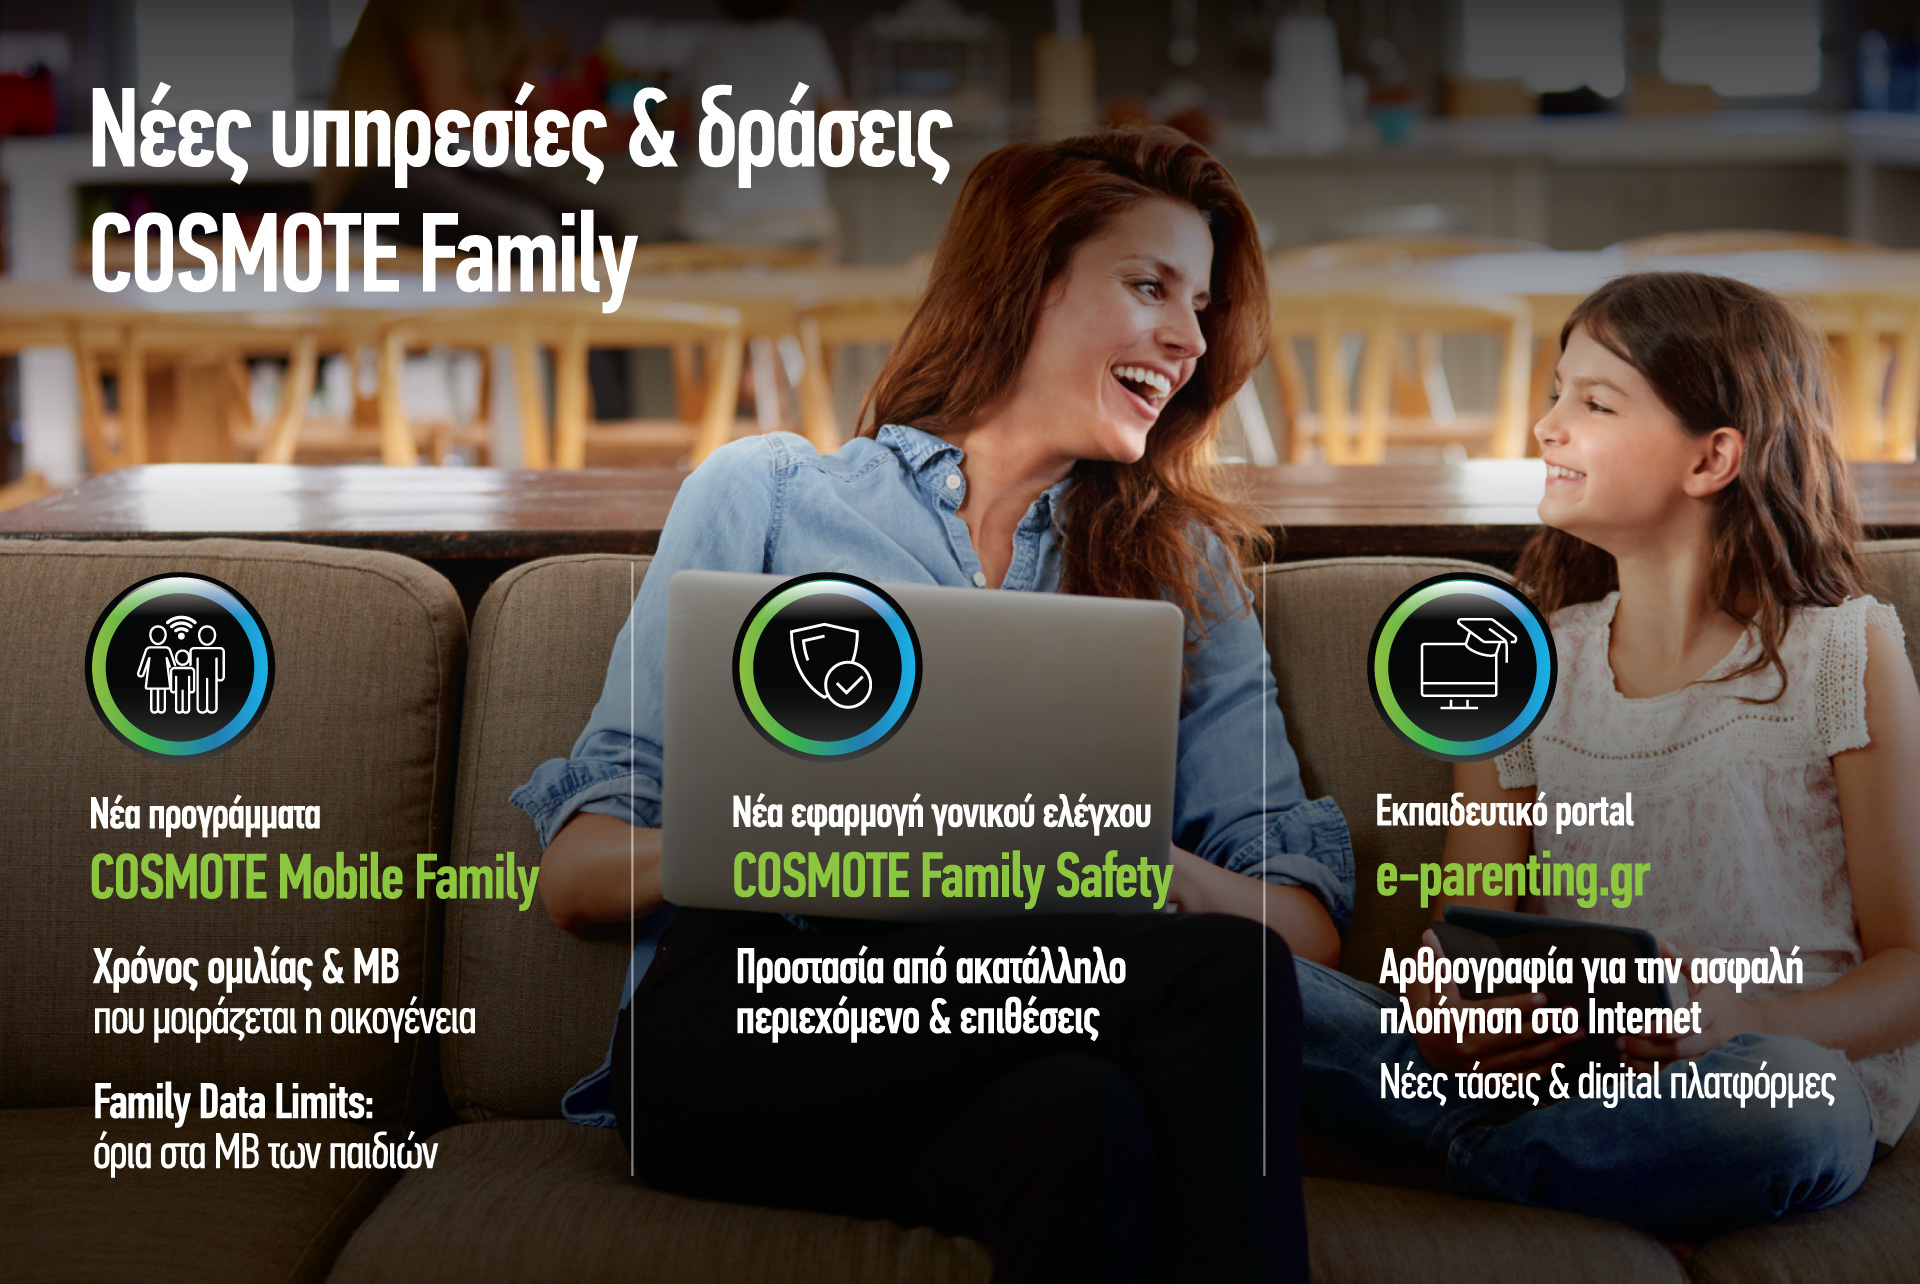 COSMOTE Family actions